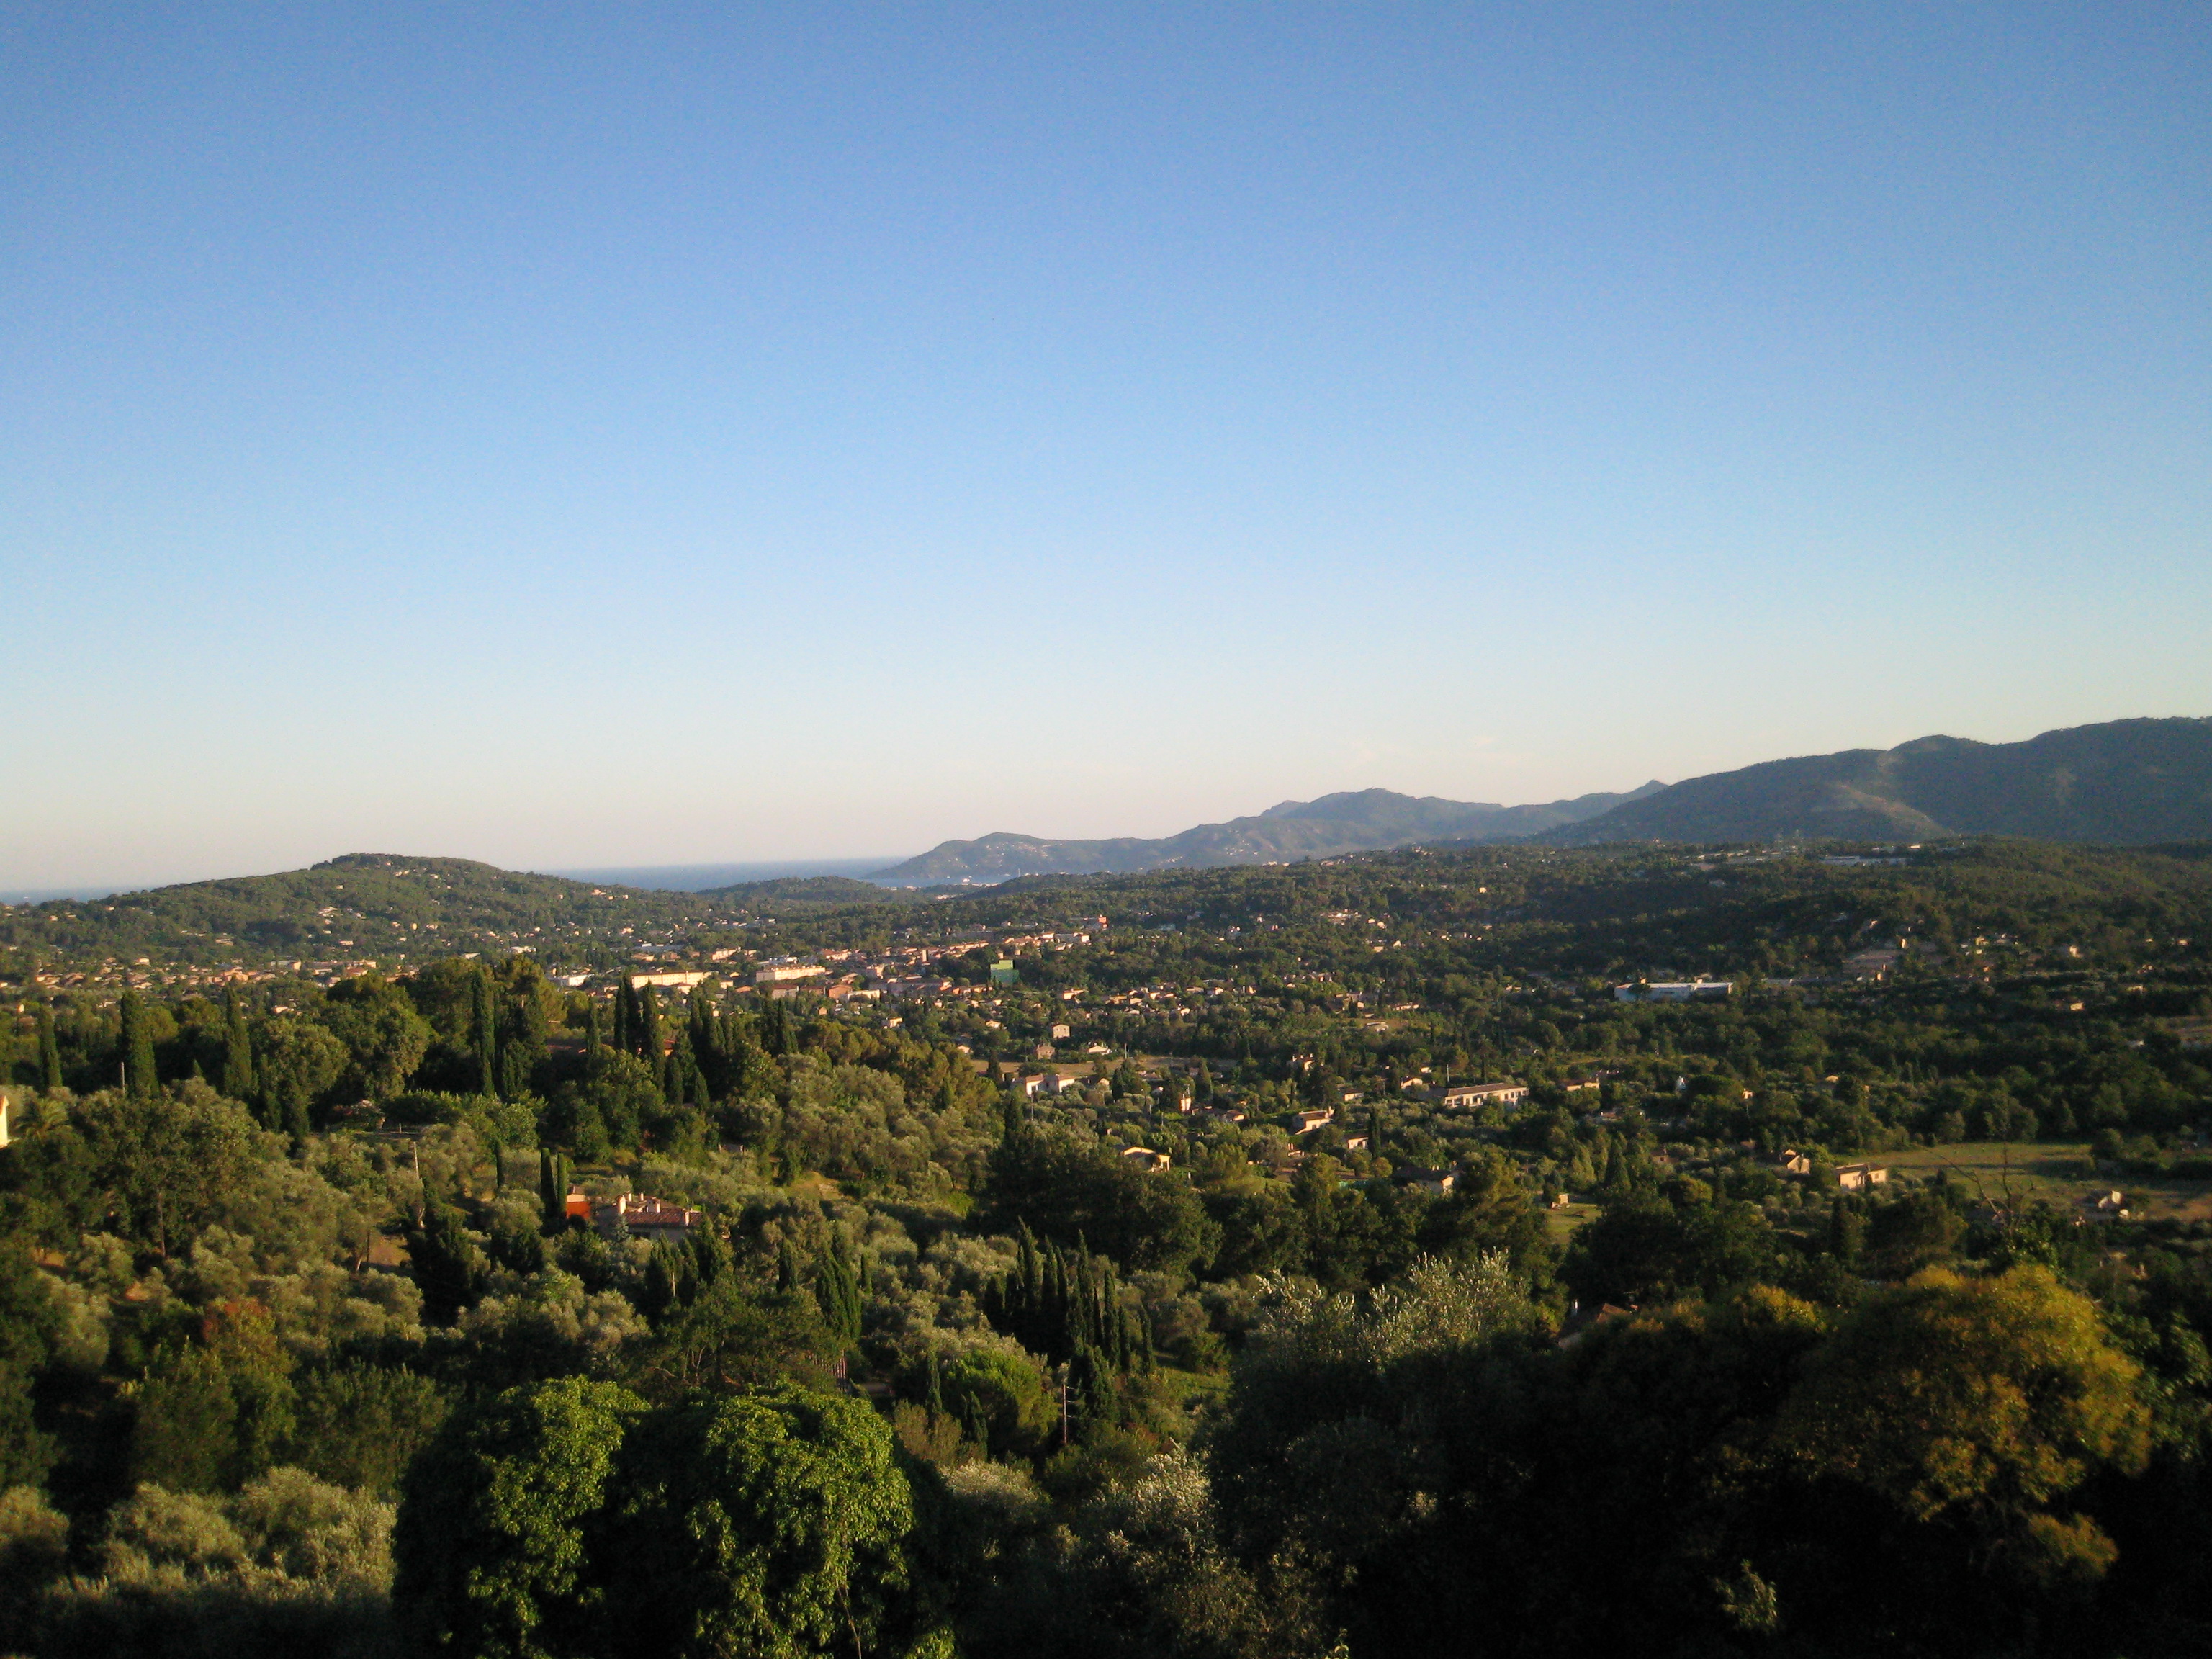 The view from Grasse